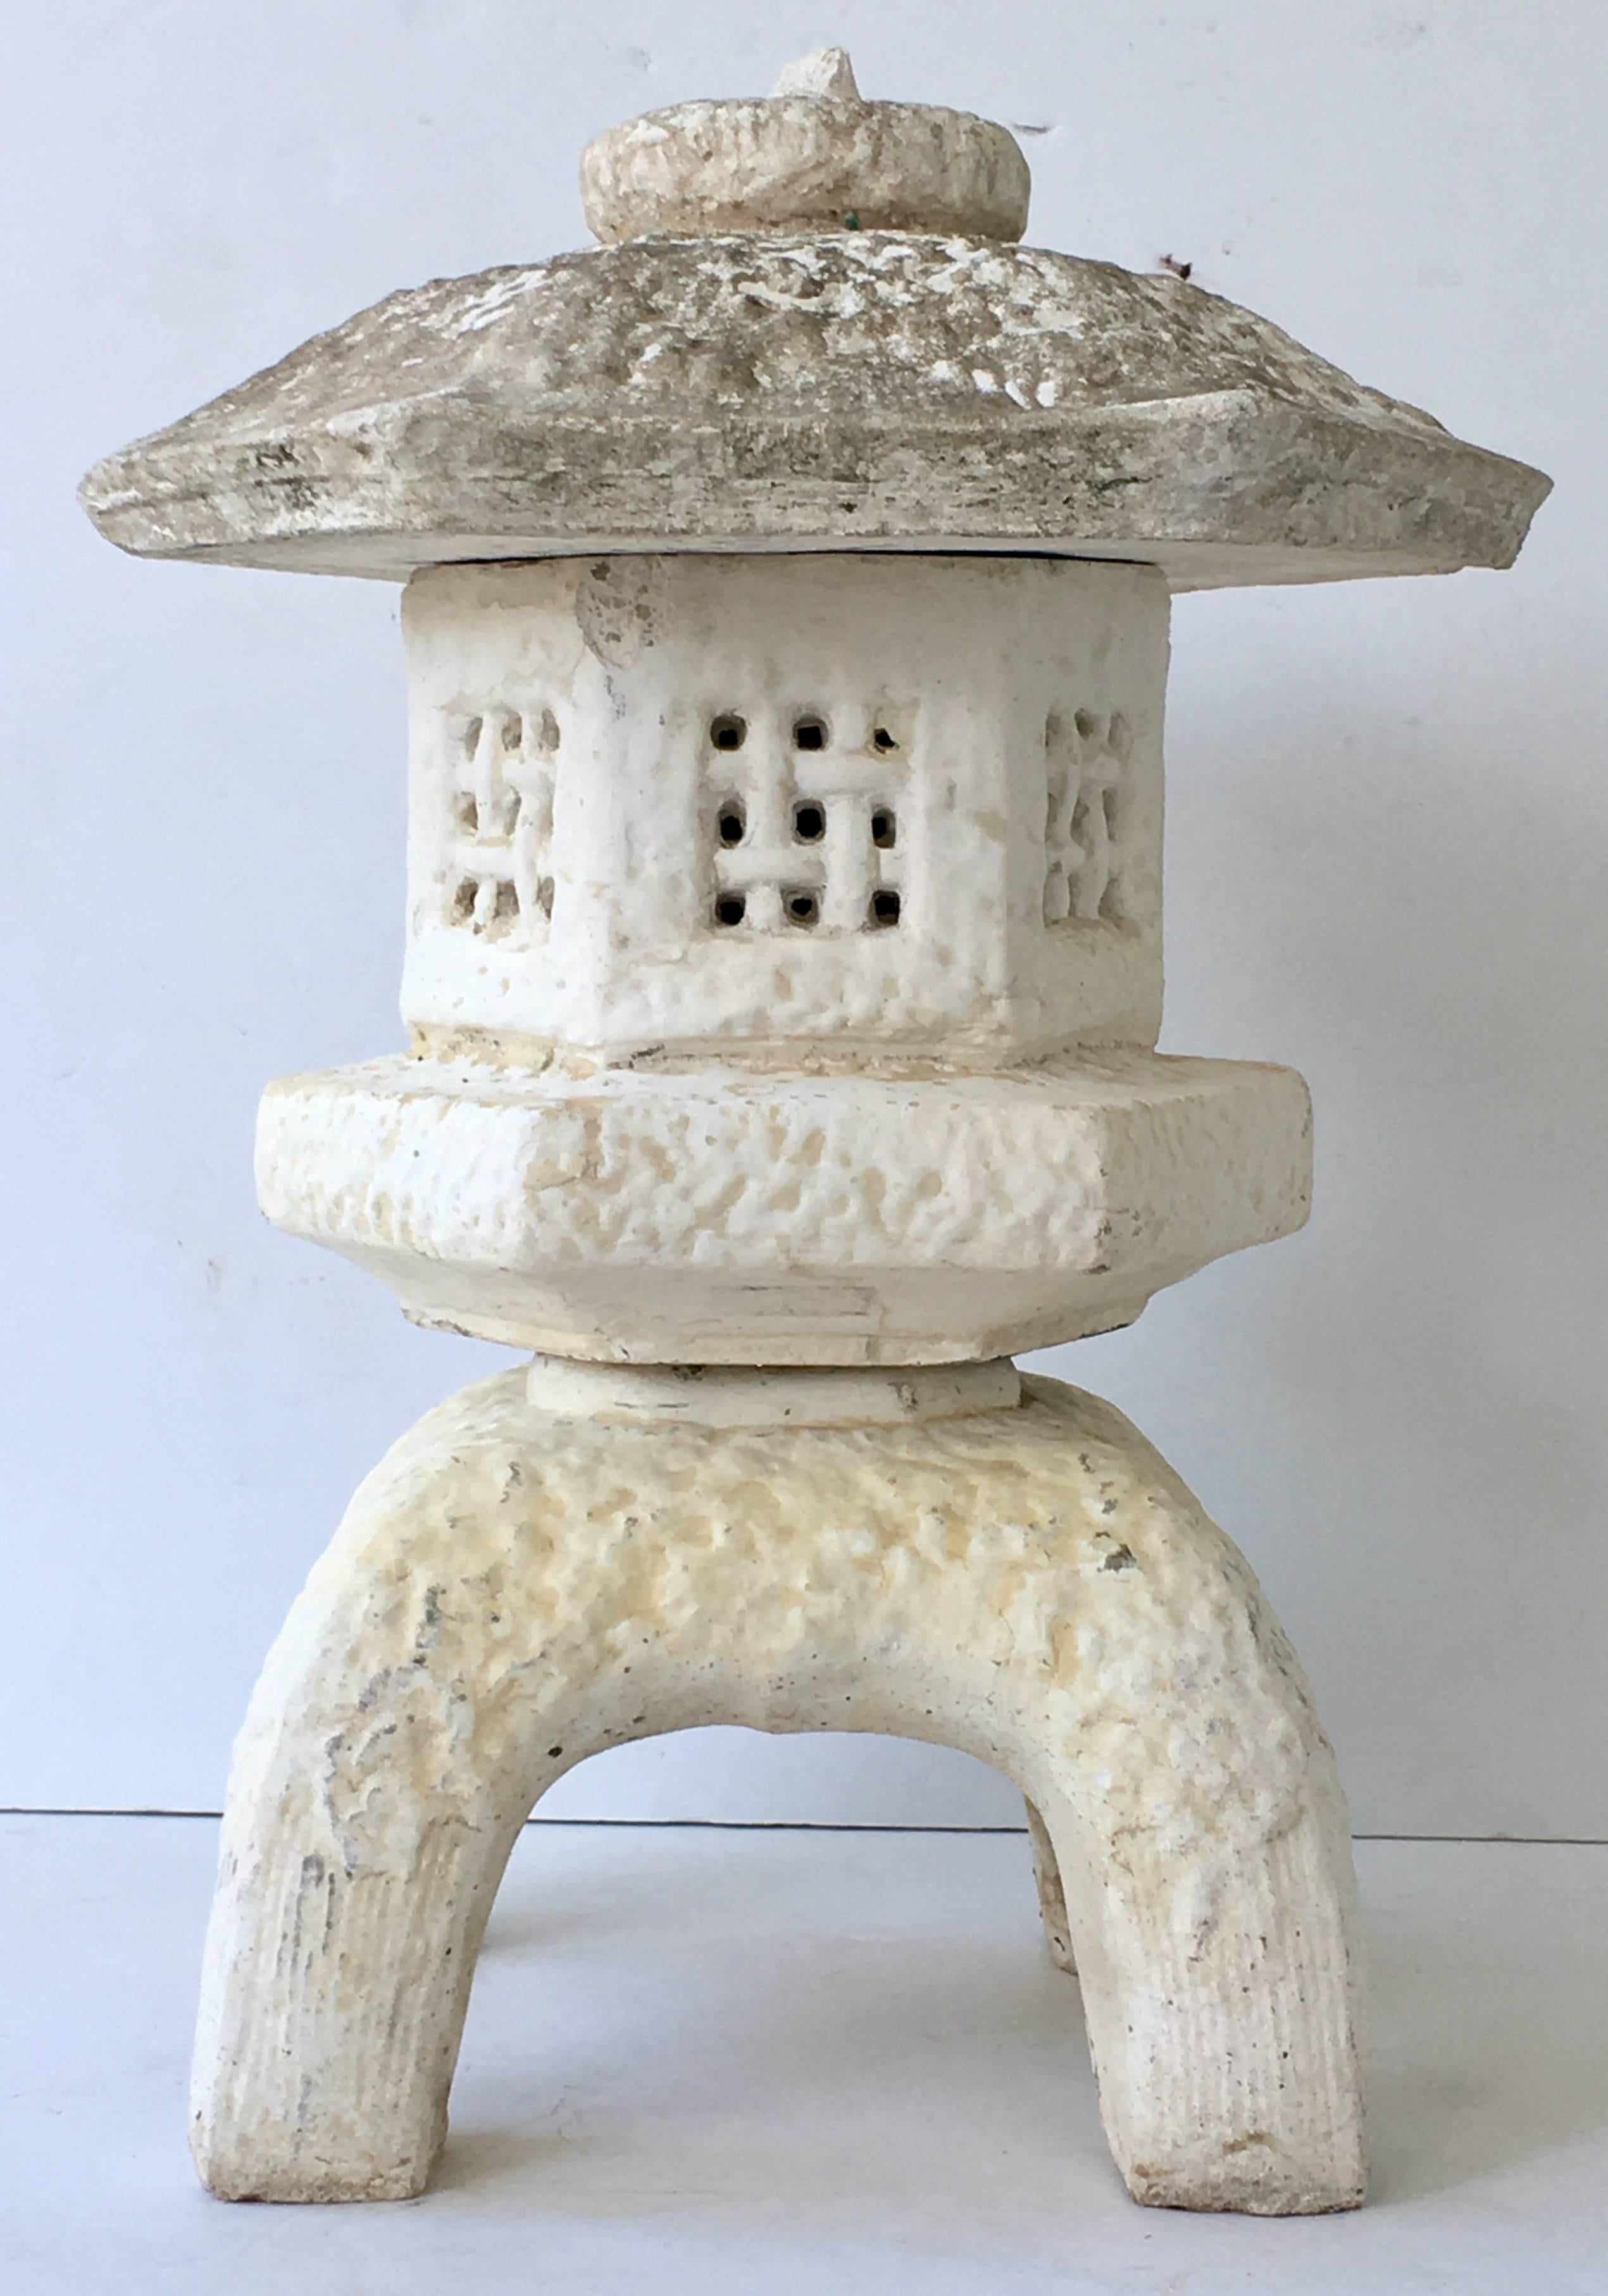 Mid-Century Japanese three-piece cast stone pagoda lantern sculpture.
This coveted patina aged garden sculpture is three pieces, the base, the body and lid. Appropriate wear and patina for age and use.